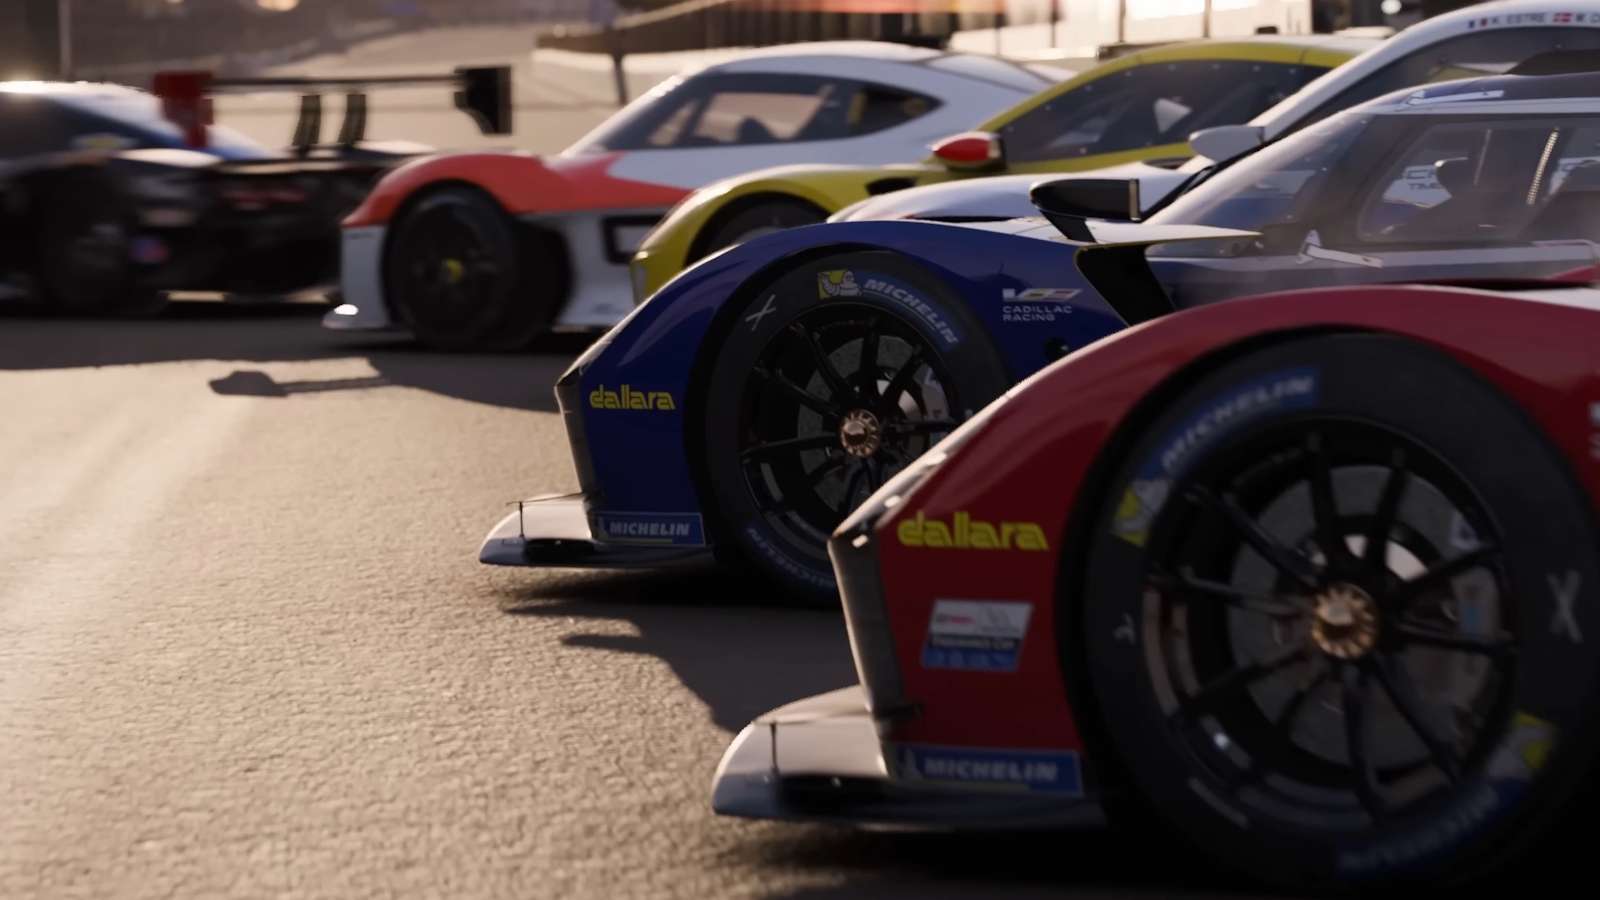 Several GT race cars pulling of of pits in Forza Motorsport.